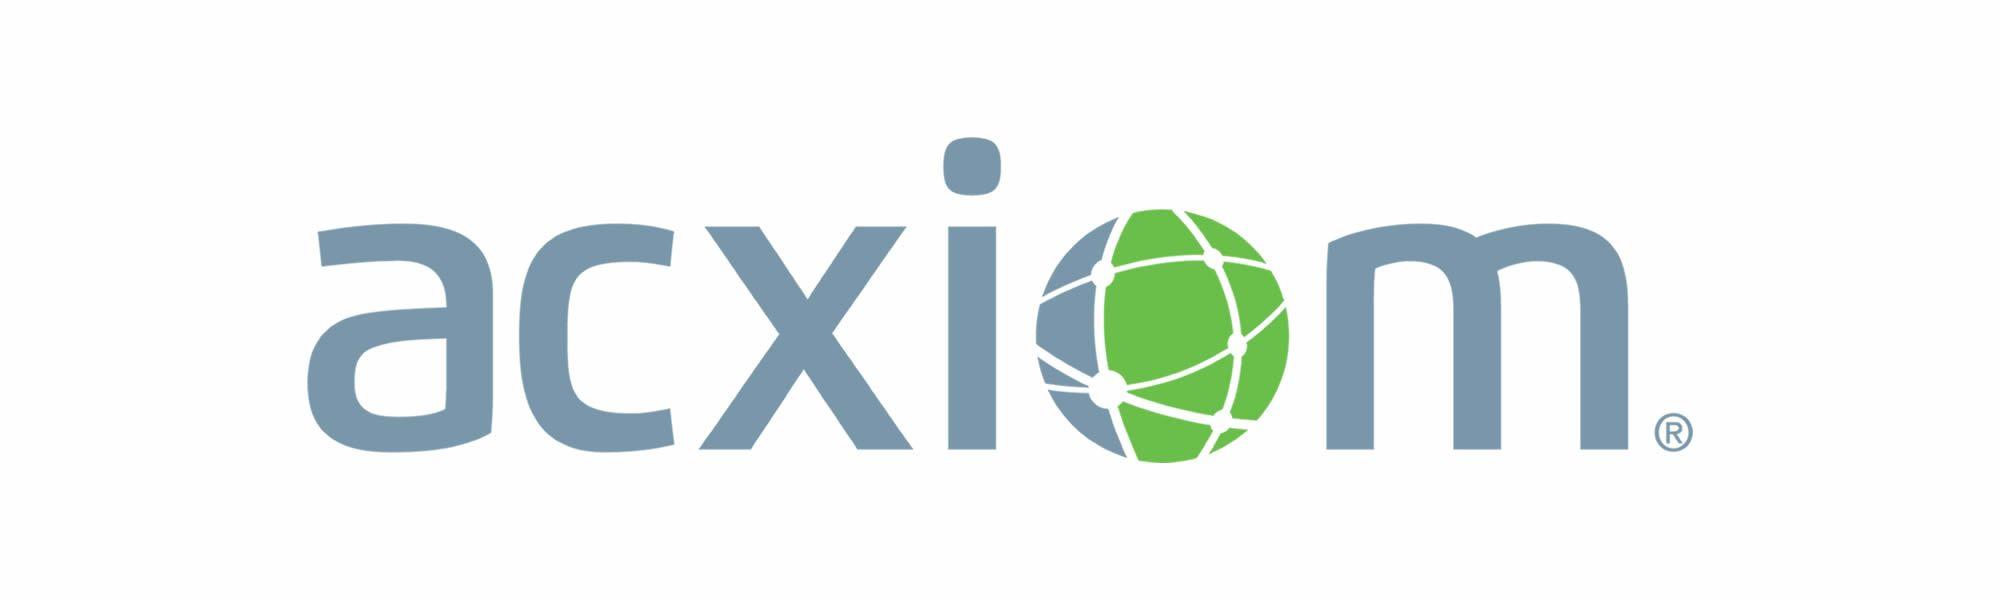 Acxiom Logo - Acxiom Marketing Solutions Joins IPG Family of Companies